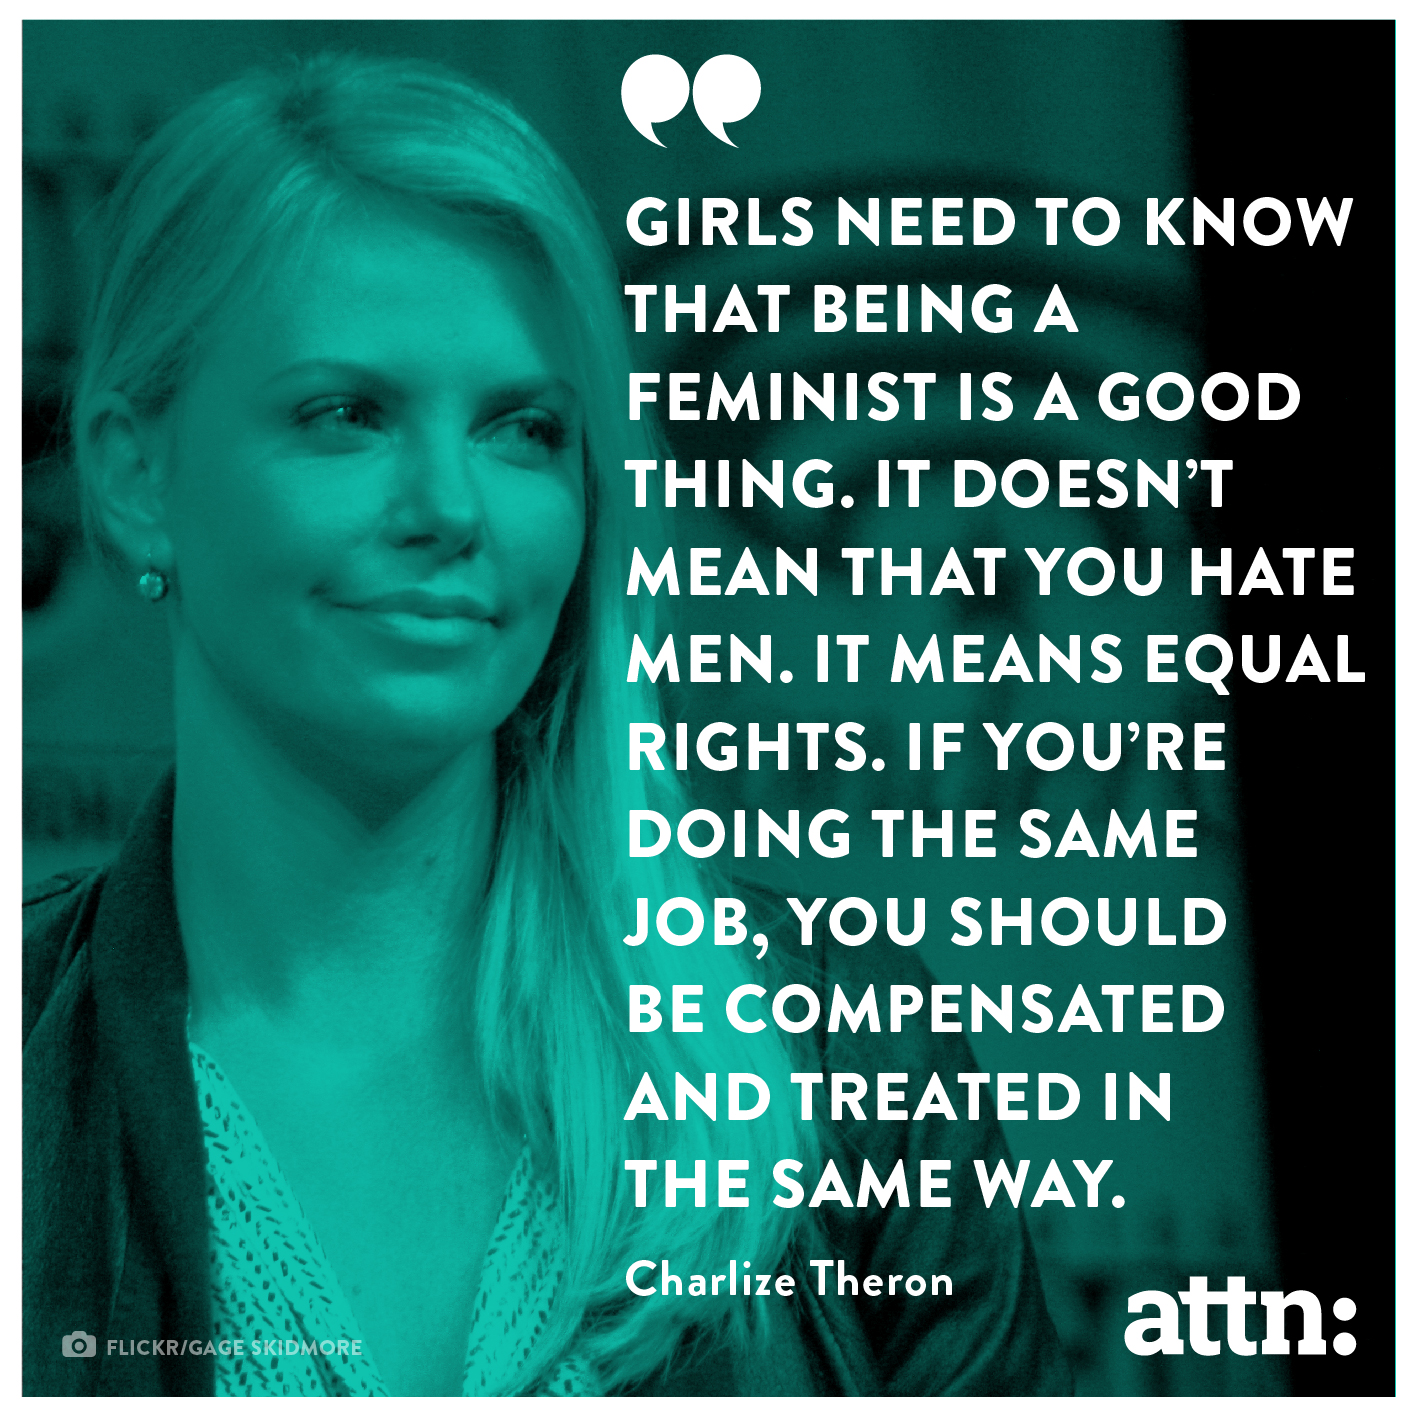 Charlize Theron comments on feminism